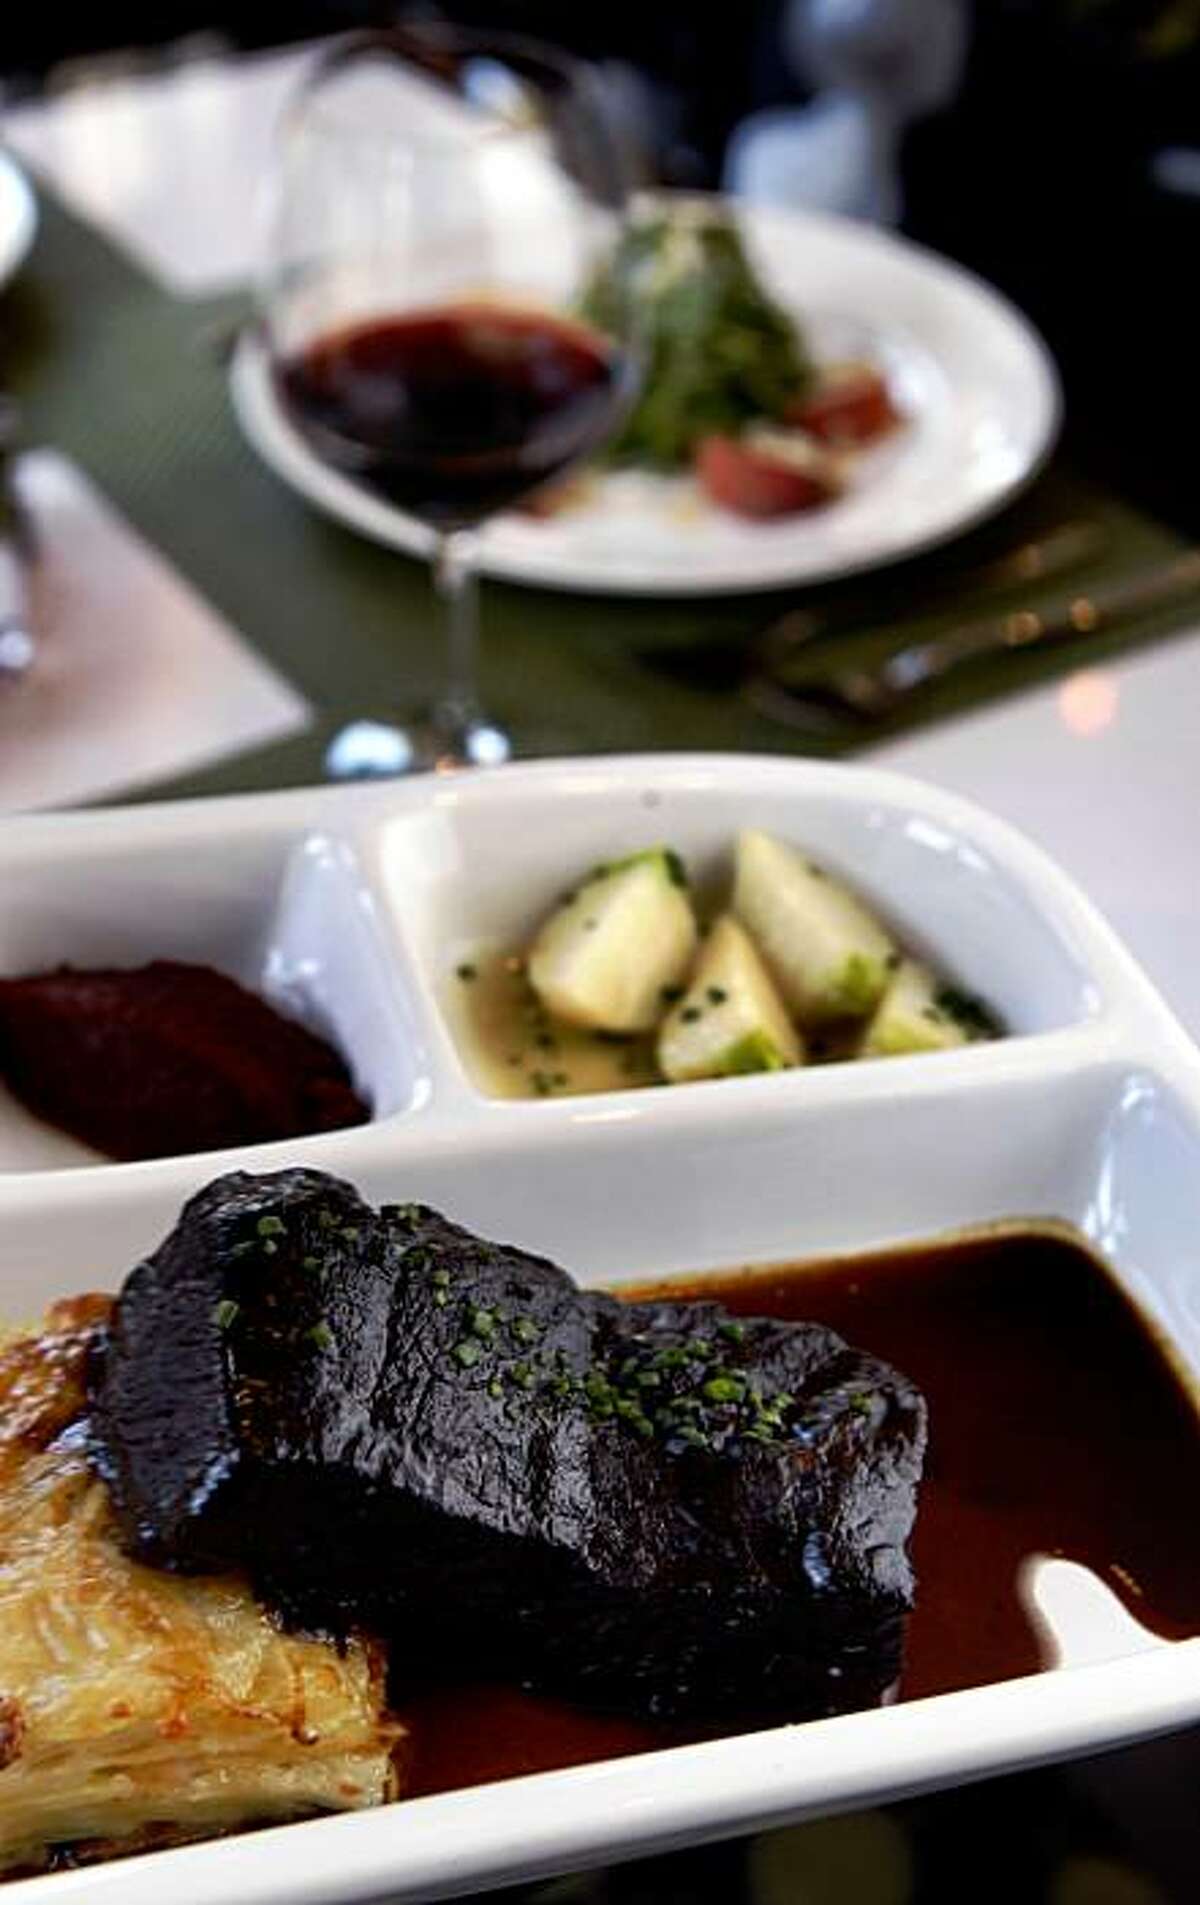 The new modern Bistro in Berkeley, Five on Allston Way offers a verity of main dishes including Short rib "pot roast" seved with cheddar potato gratin.